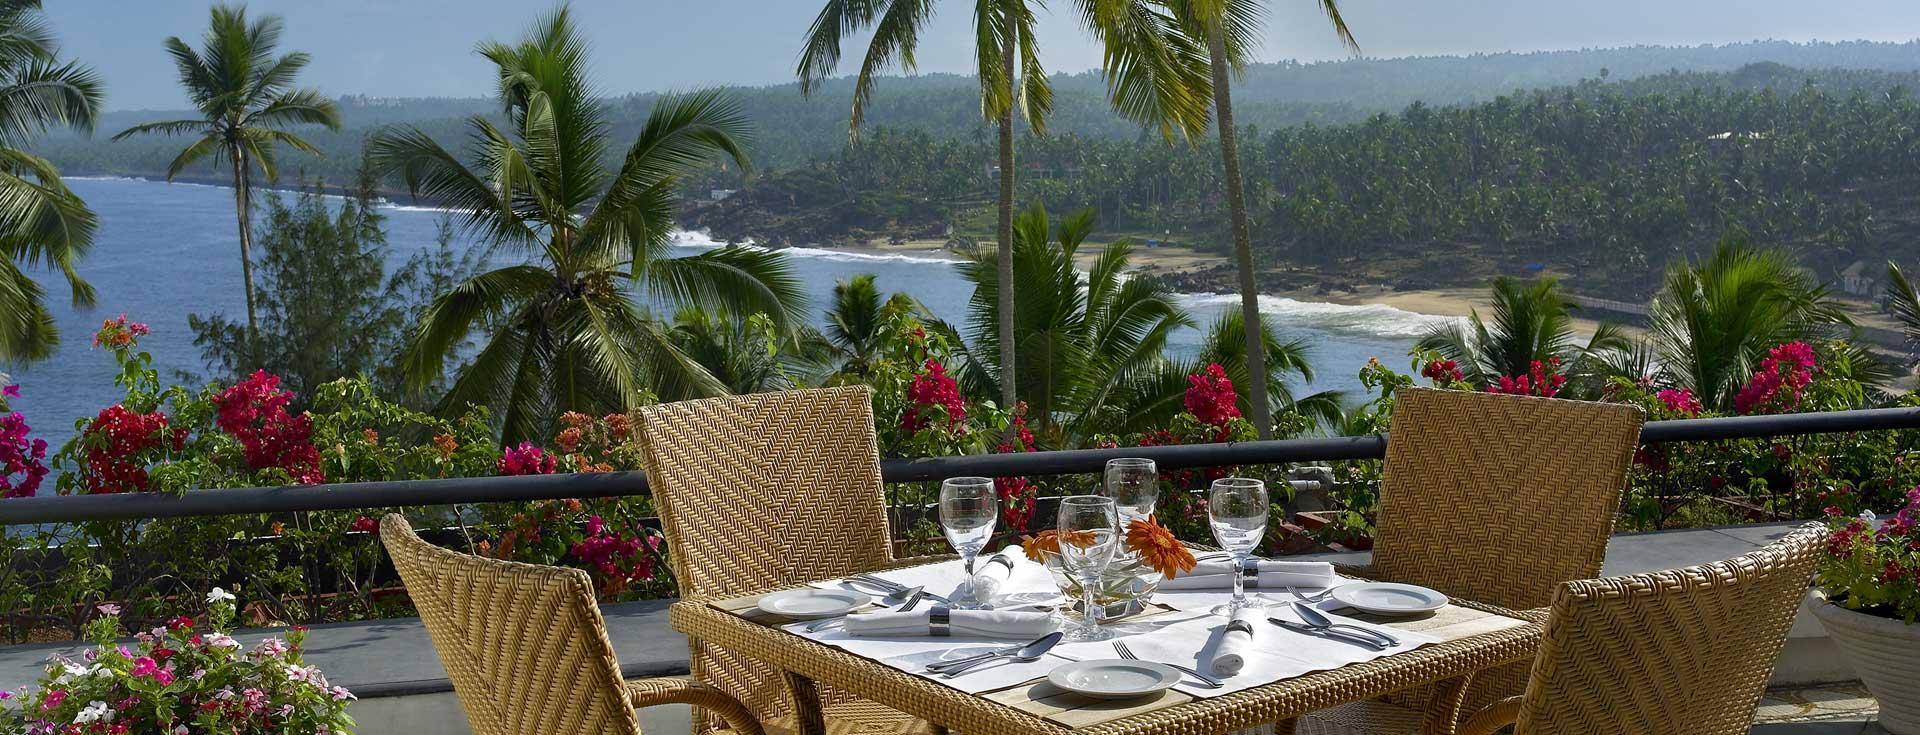 The Terrace - All-day dining at The Leela Kovalam